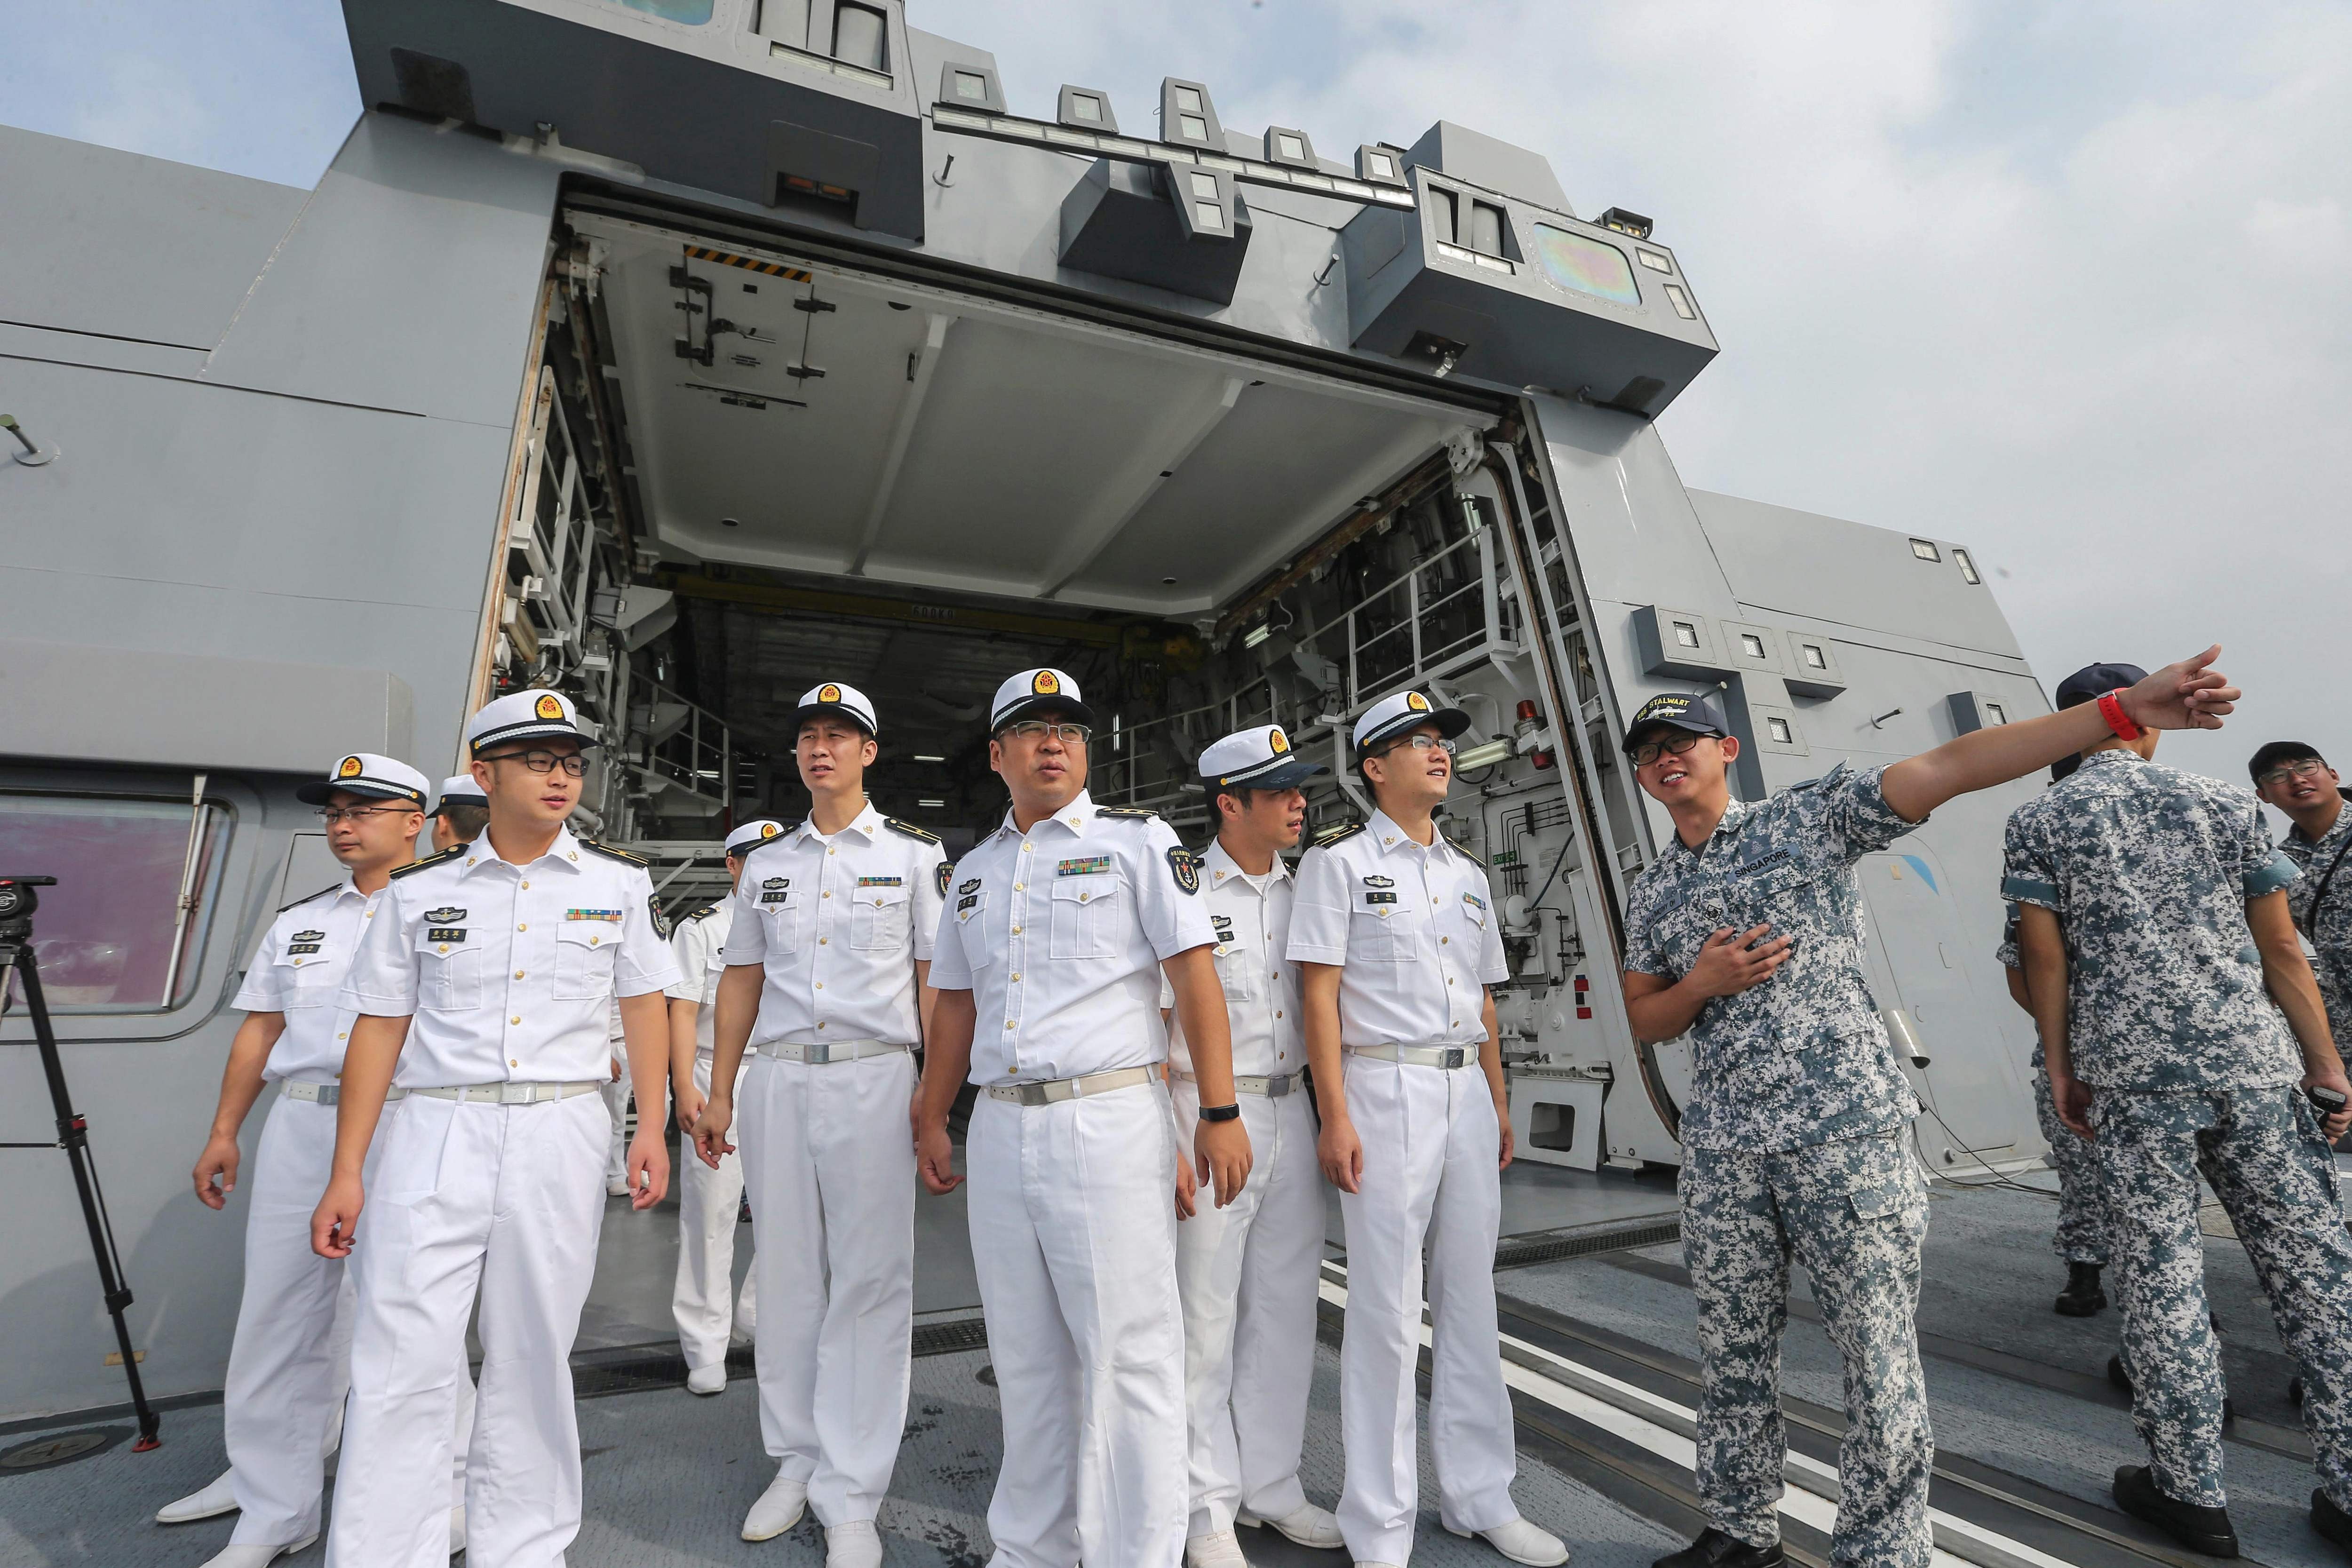 Chinese sailors (in white) visit the Singapore Navy frigate RSS Stalwart during the Asean-China Maritime Exercise at a military port in Zhanjiang, in China's southern Guangdong province, on October 24. Photo: STR / AFP